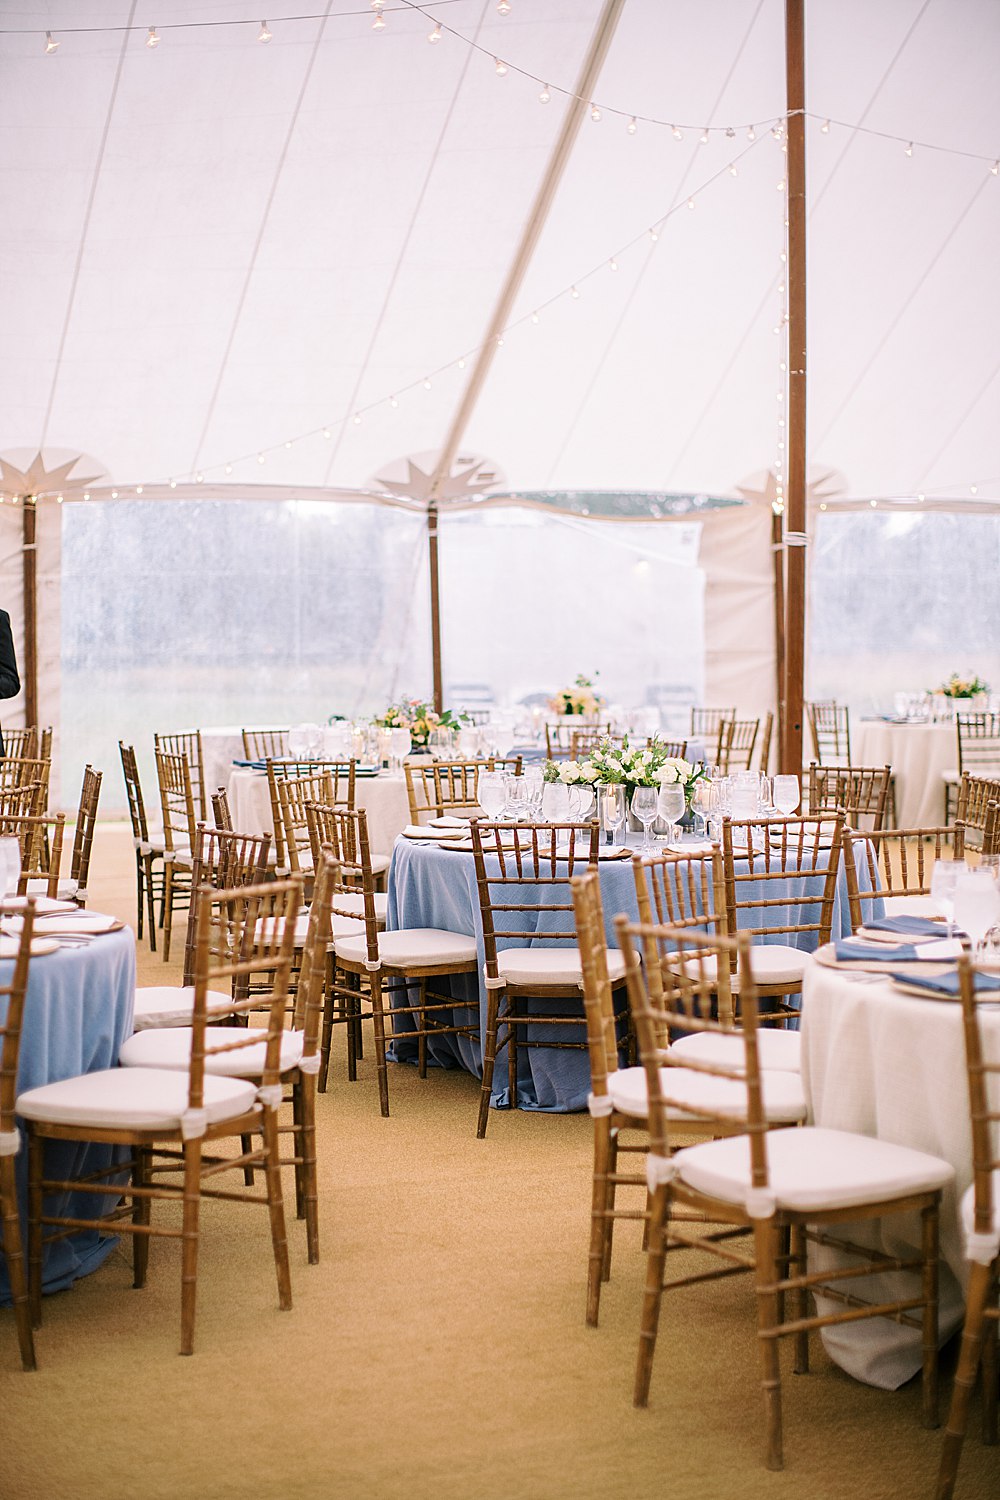 Early September wedding at The Inn at Perry Cabin in St. Michael's, Maryland.